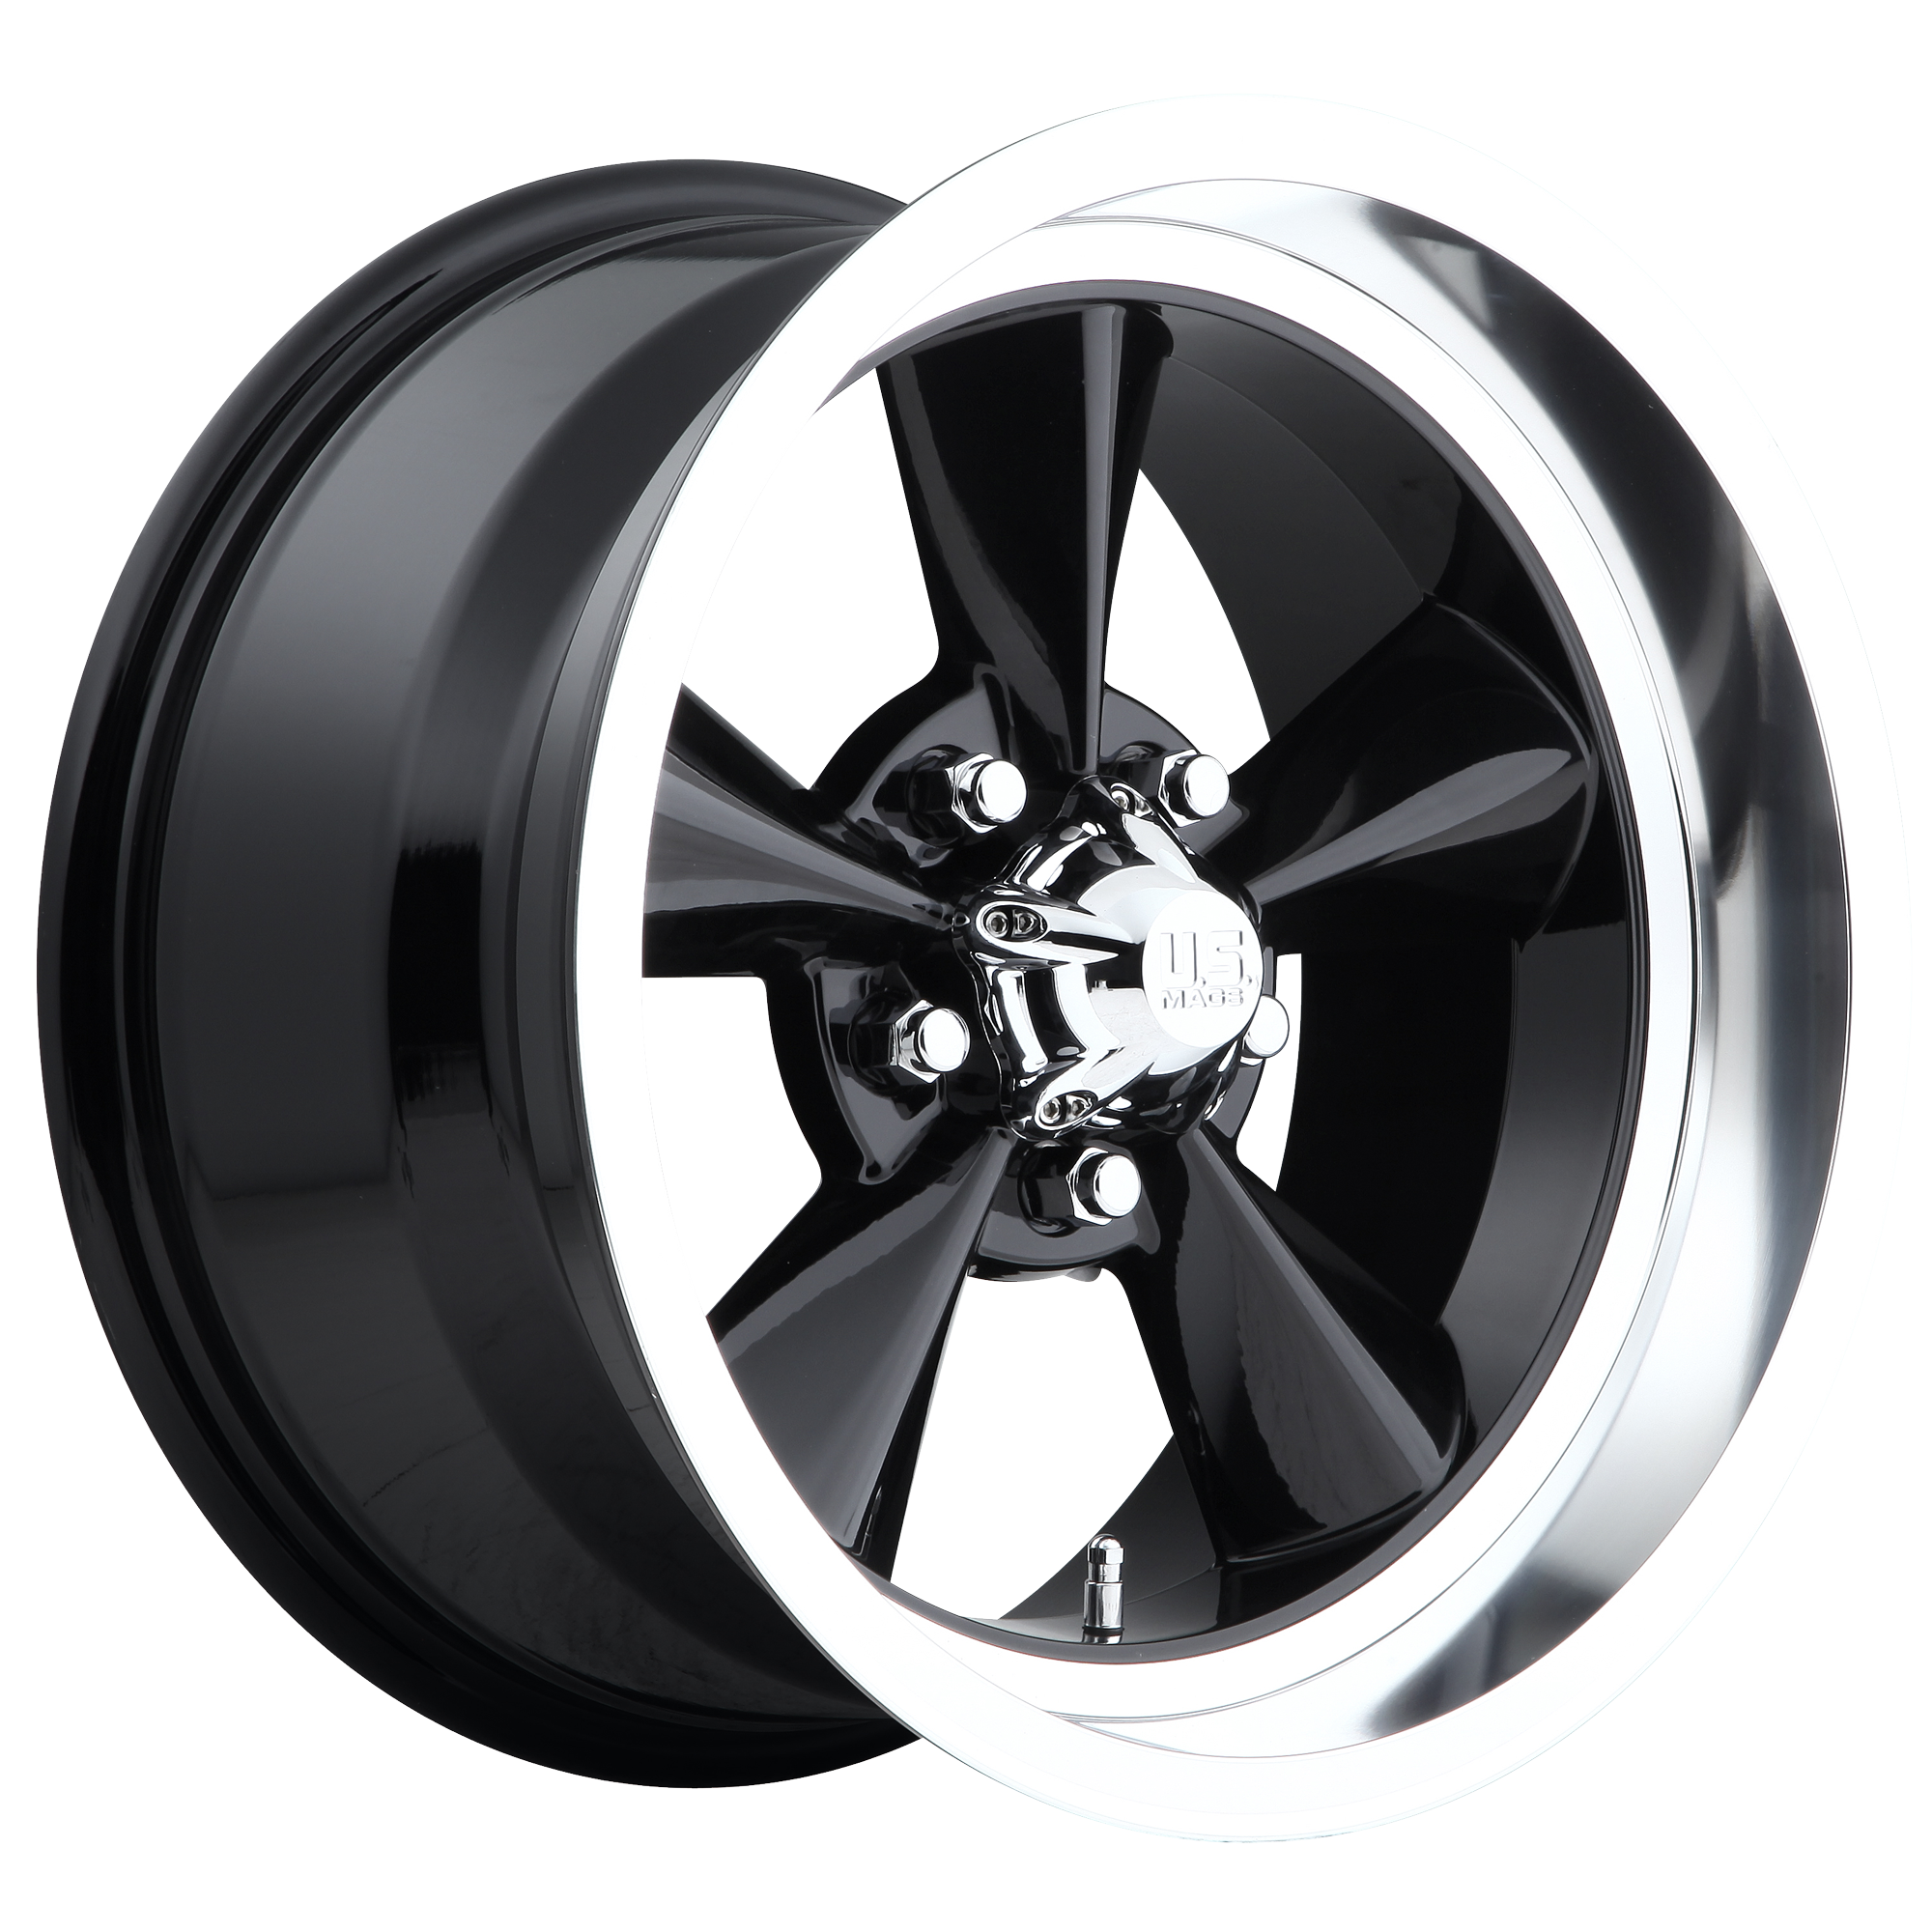 STANDARD 17x8 5x114.30 GLOSS BLACK (1 mm) - Tires and Engine Performance